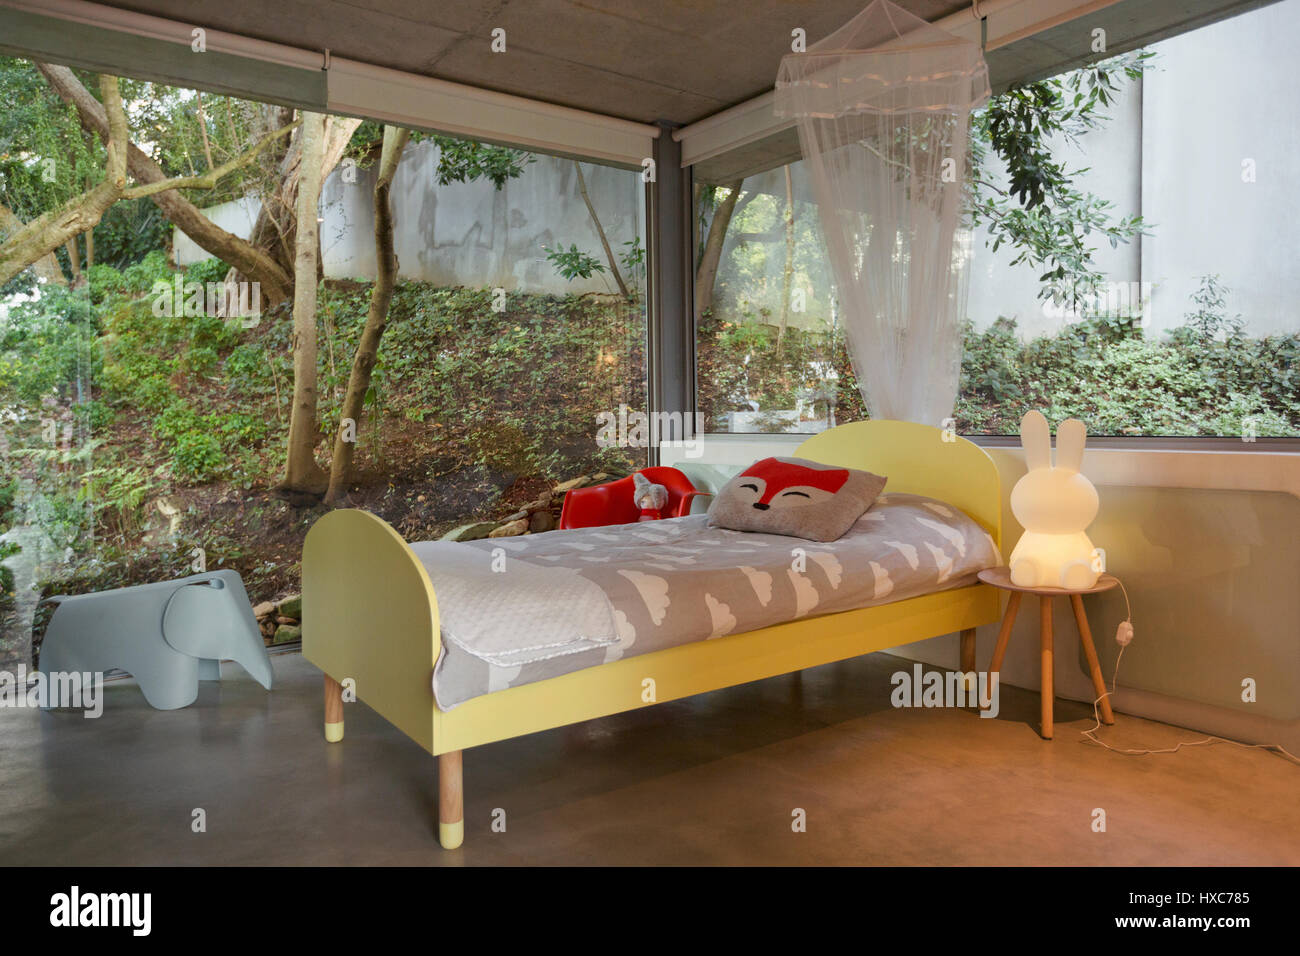 Modern luxury home showcase interior child’s bedroom surrounded by windows Stock Photo